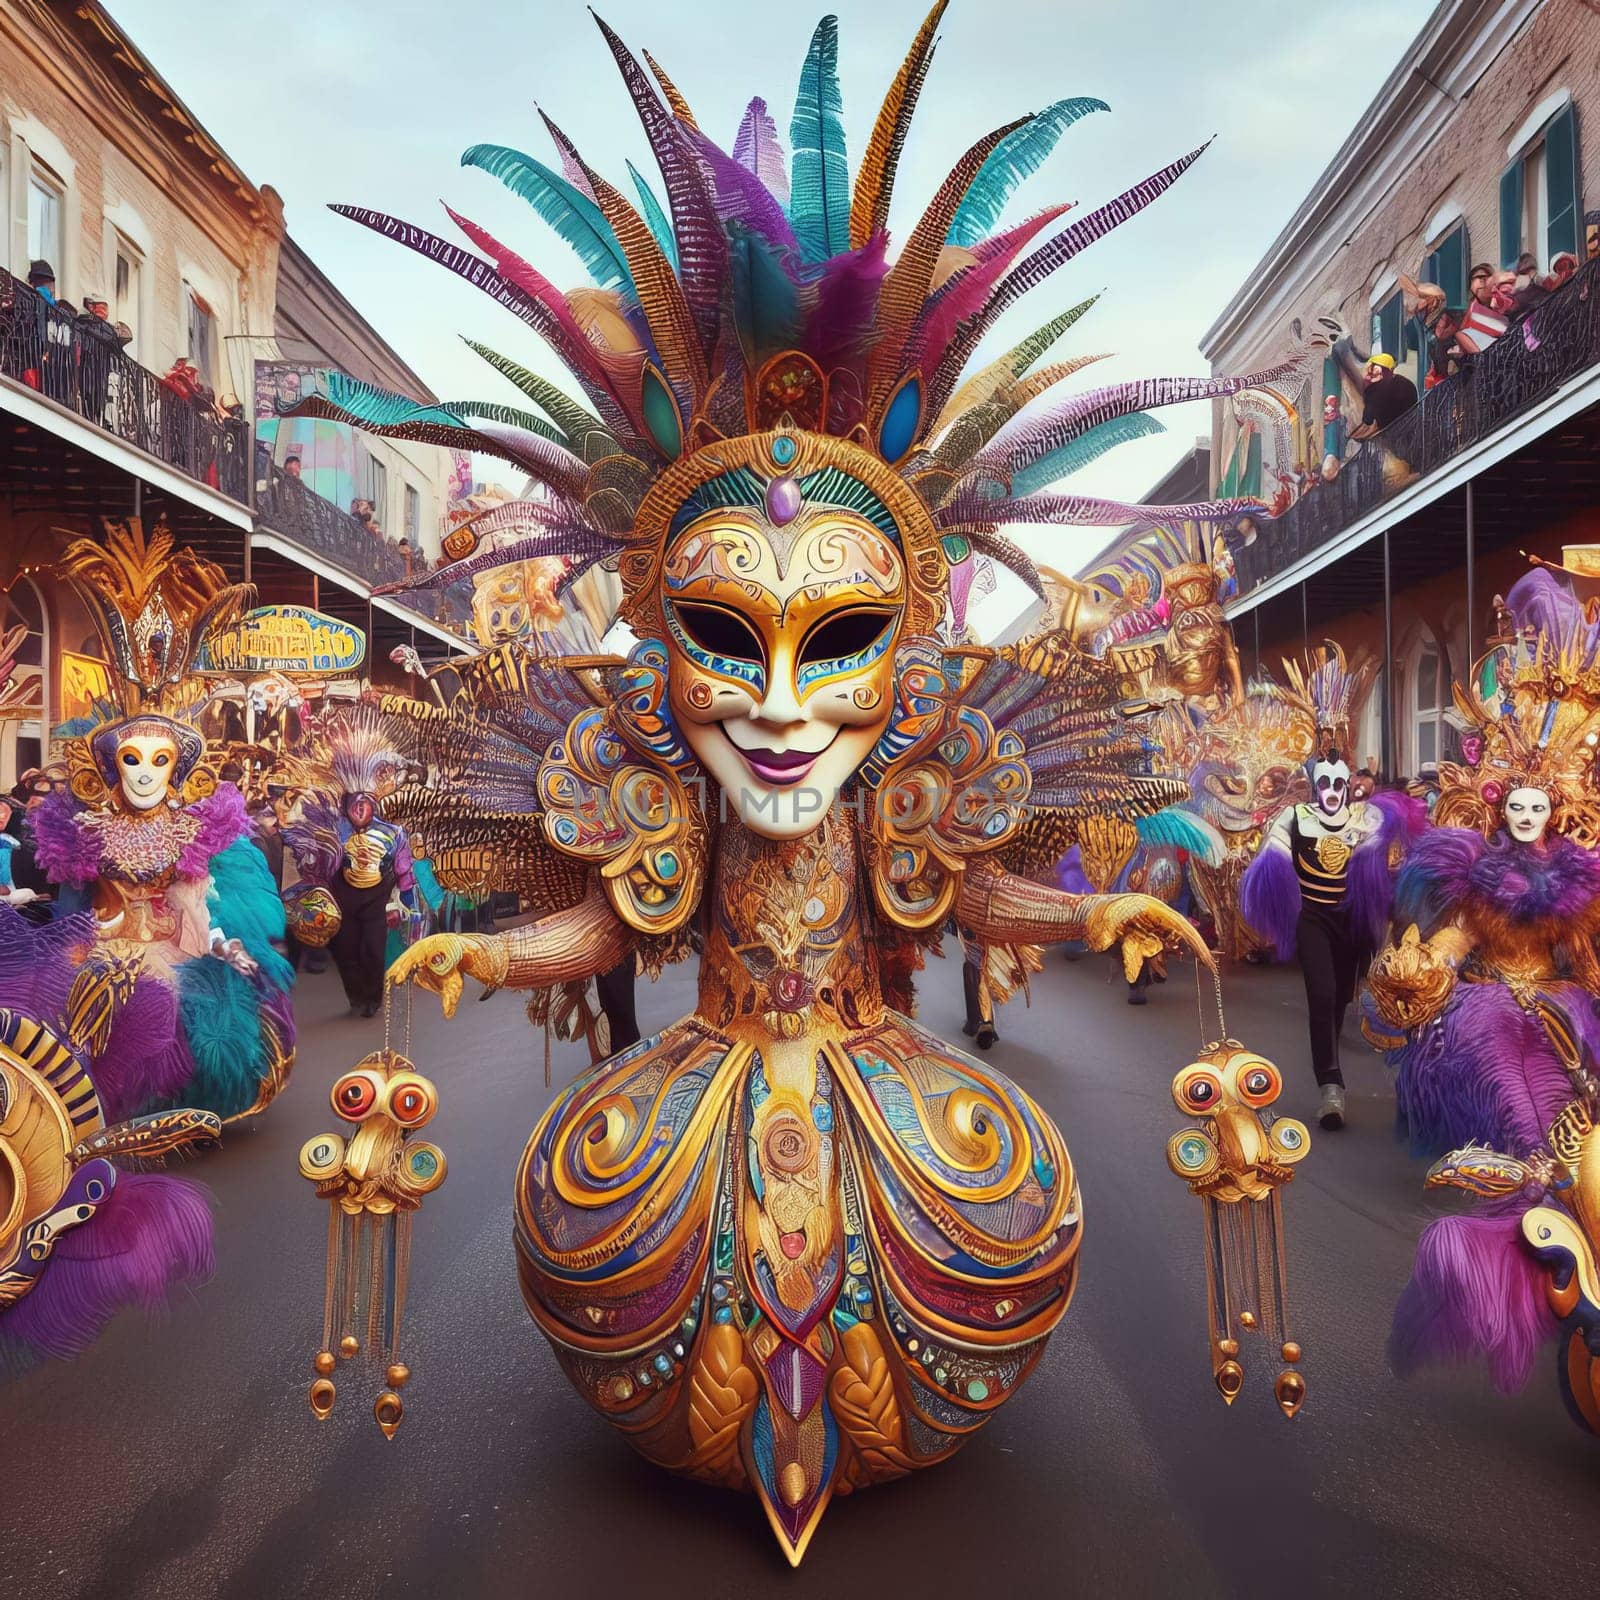 Vibrant Mardi Gras parade with participants in colorful, elaborate costumes, celebrating on a bustling street. by sfinks